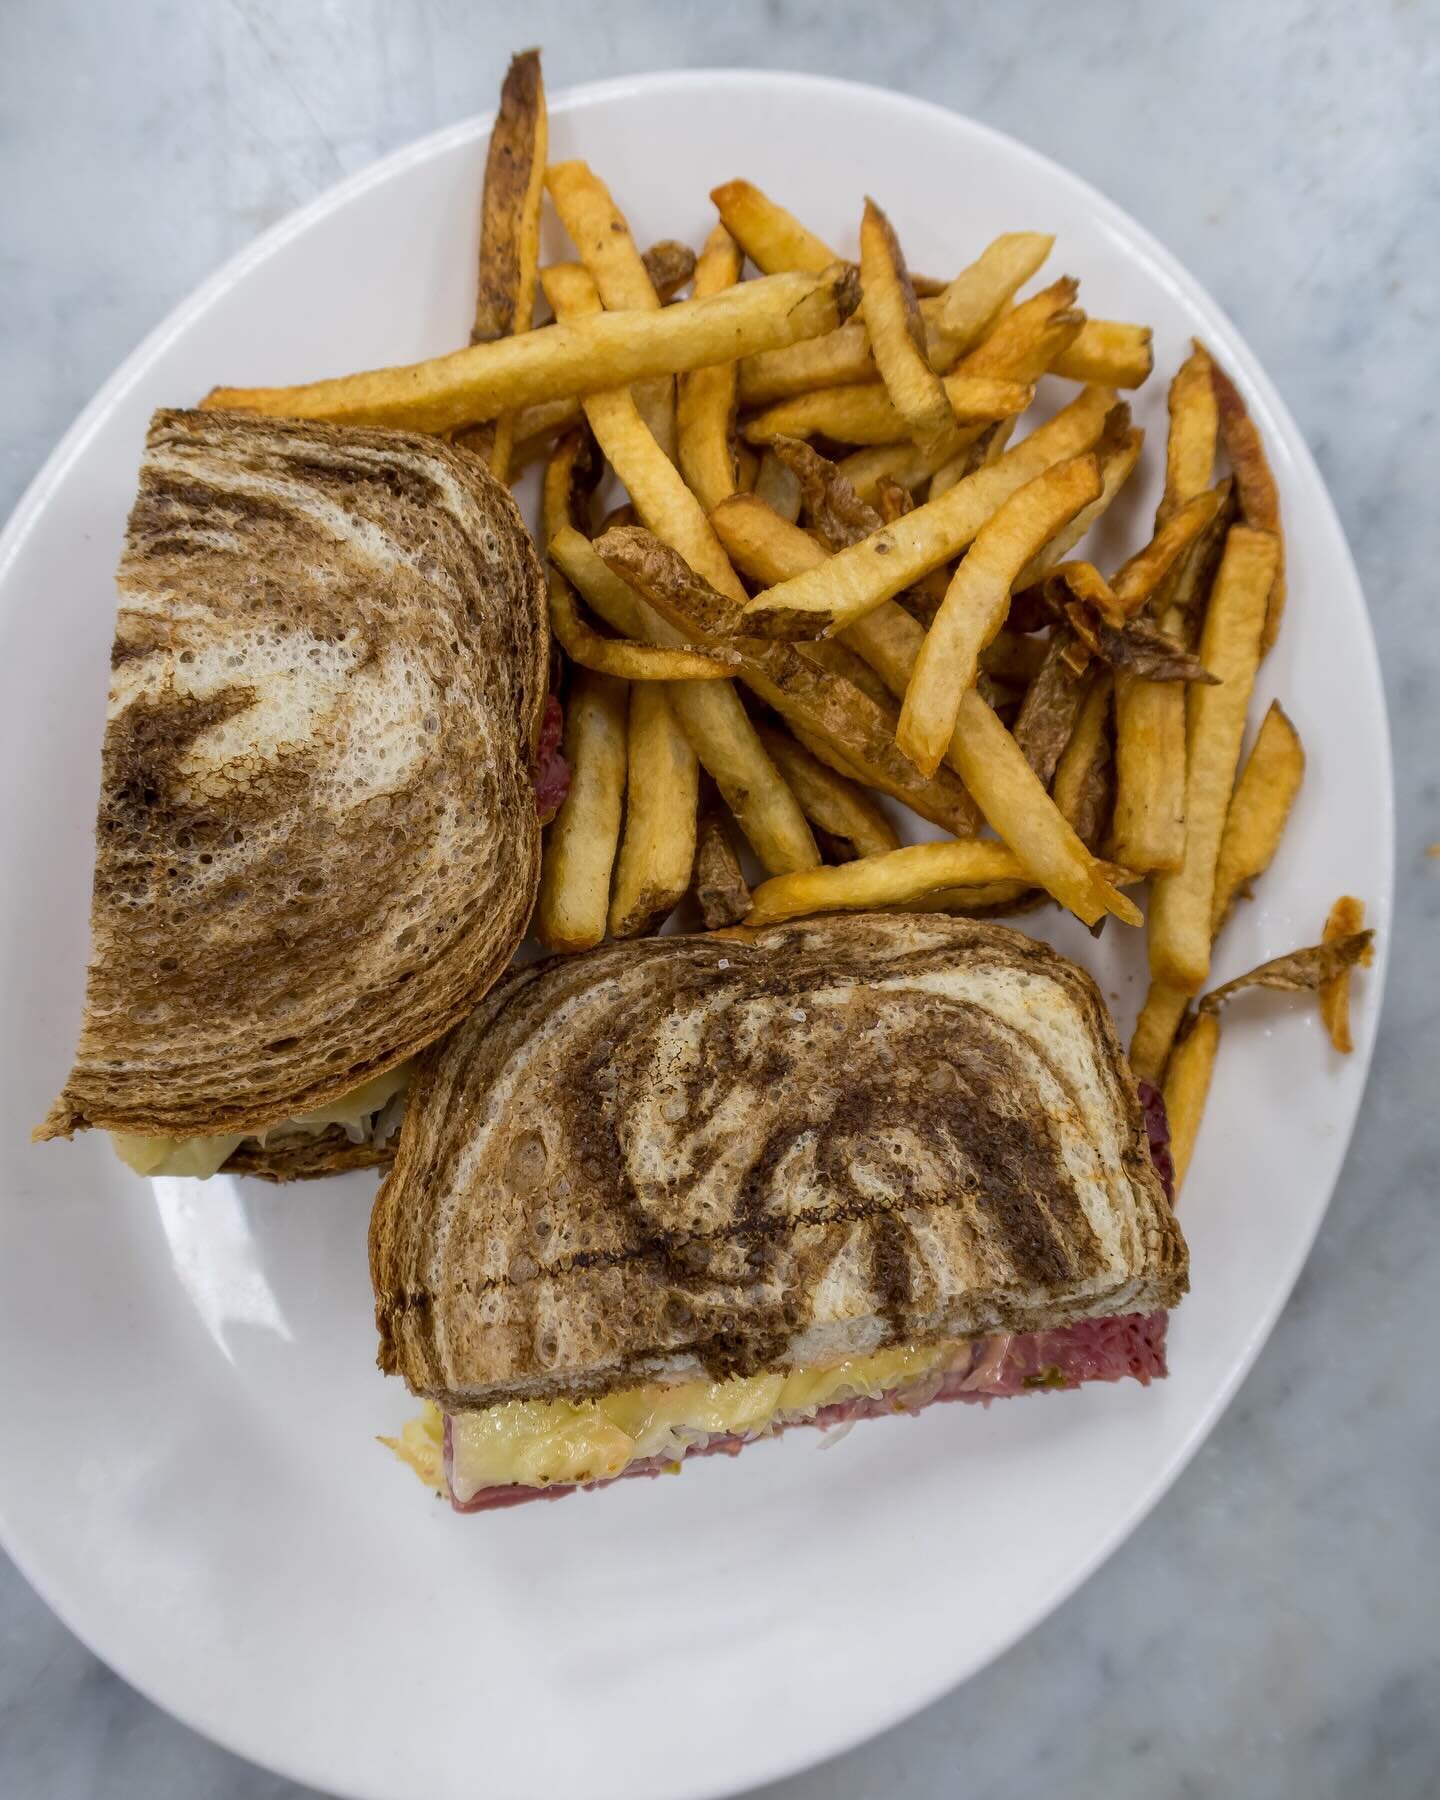 Pass us the Corned Beef Reuben 😍
Sauerkraut, Swiss Cheese, Russian Dressing, Marbled Rye Bread &amp; Pomme Frites

510 Lexington Avenue Mount Kisco, NY 10549
914 244 3663

#foodie #westchestereats #914eats #914food #westchesternyeats